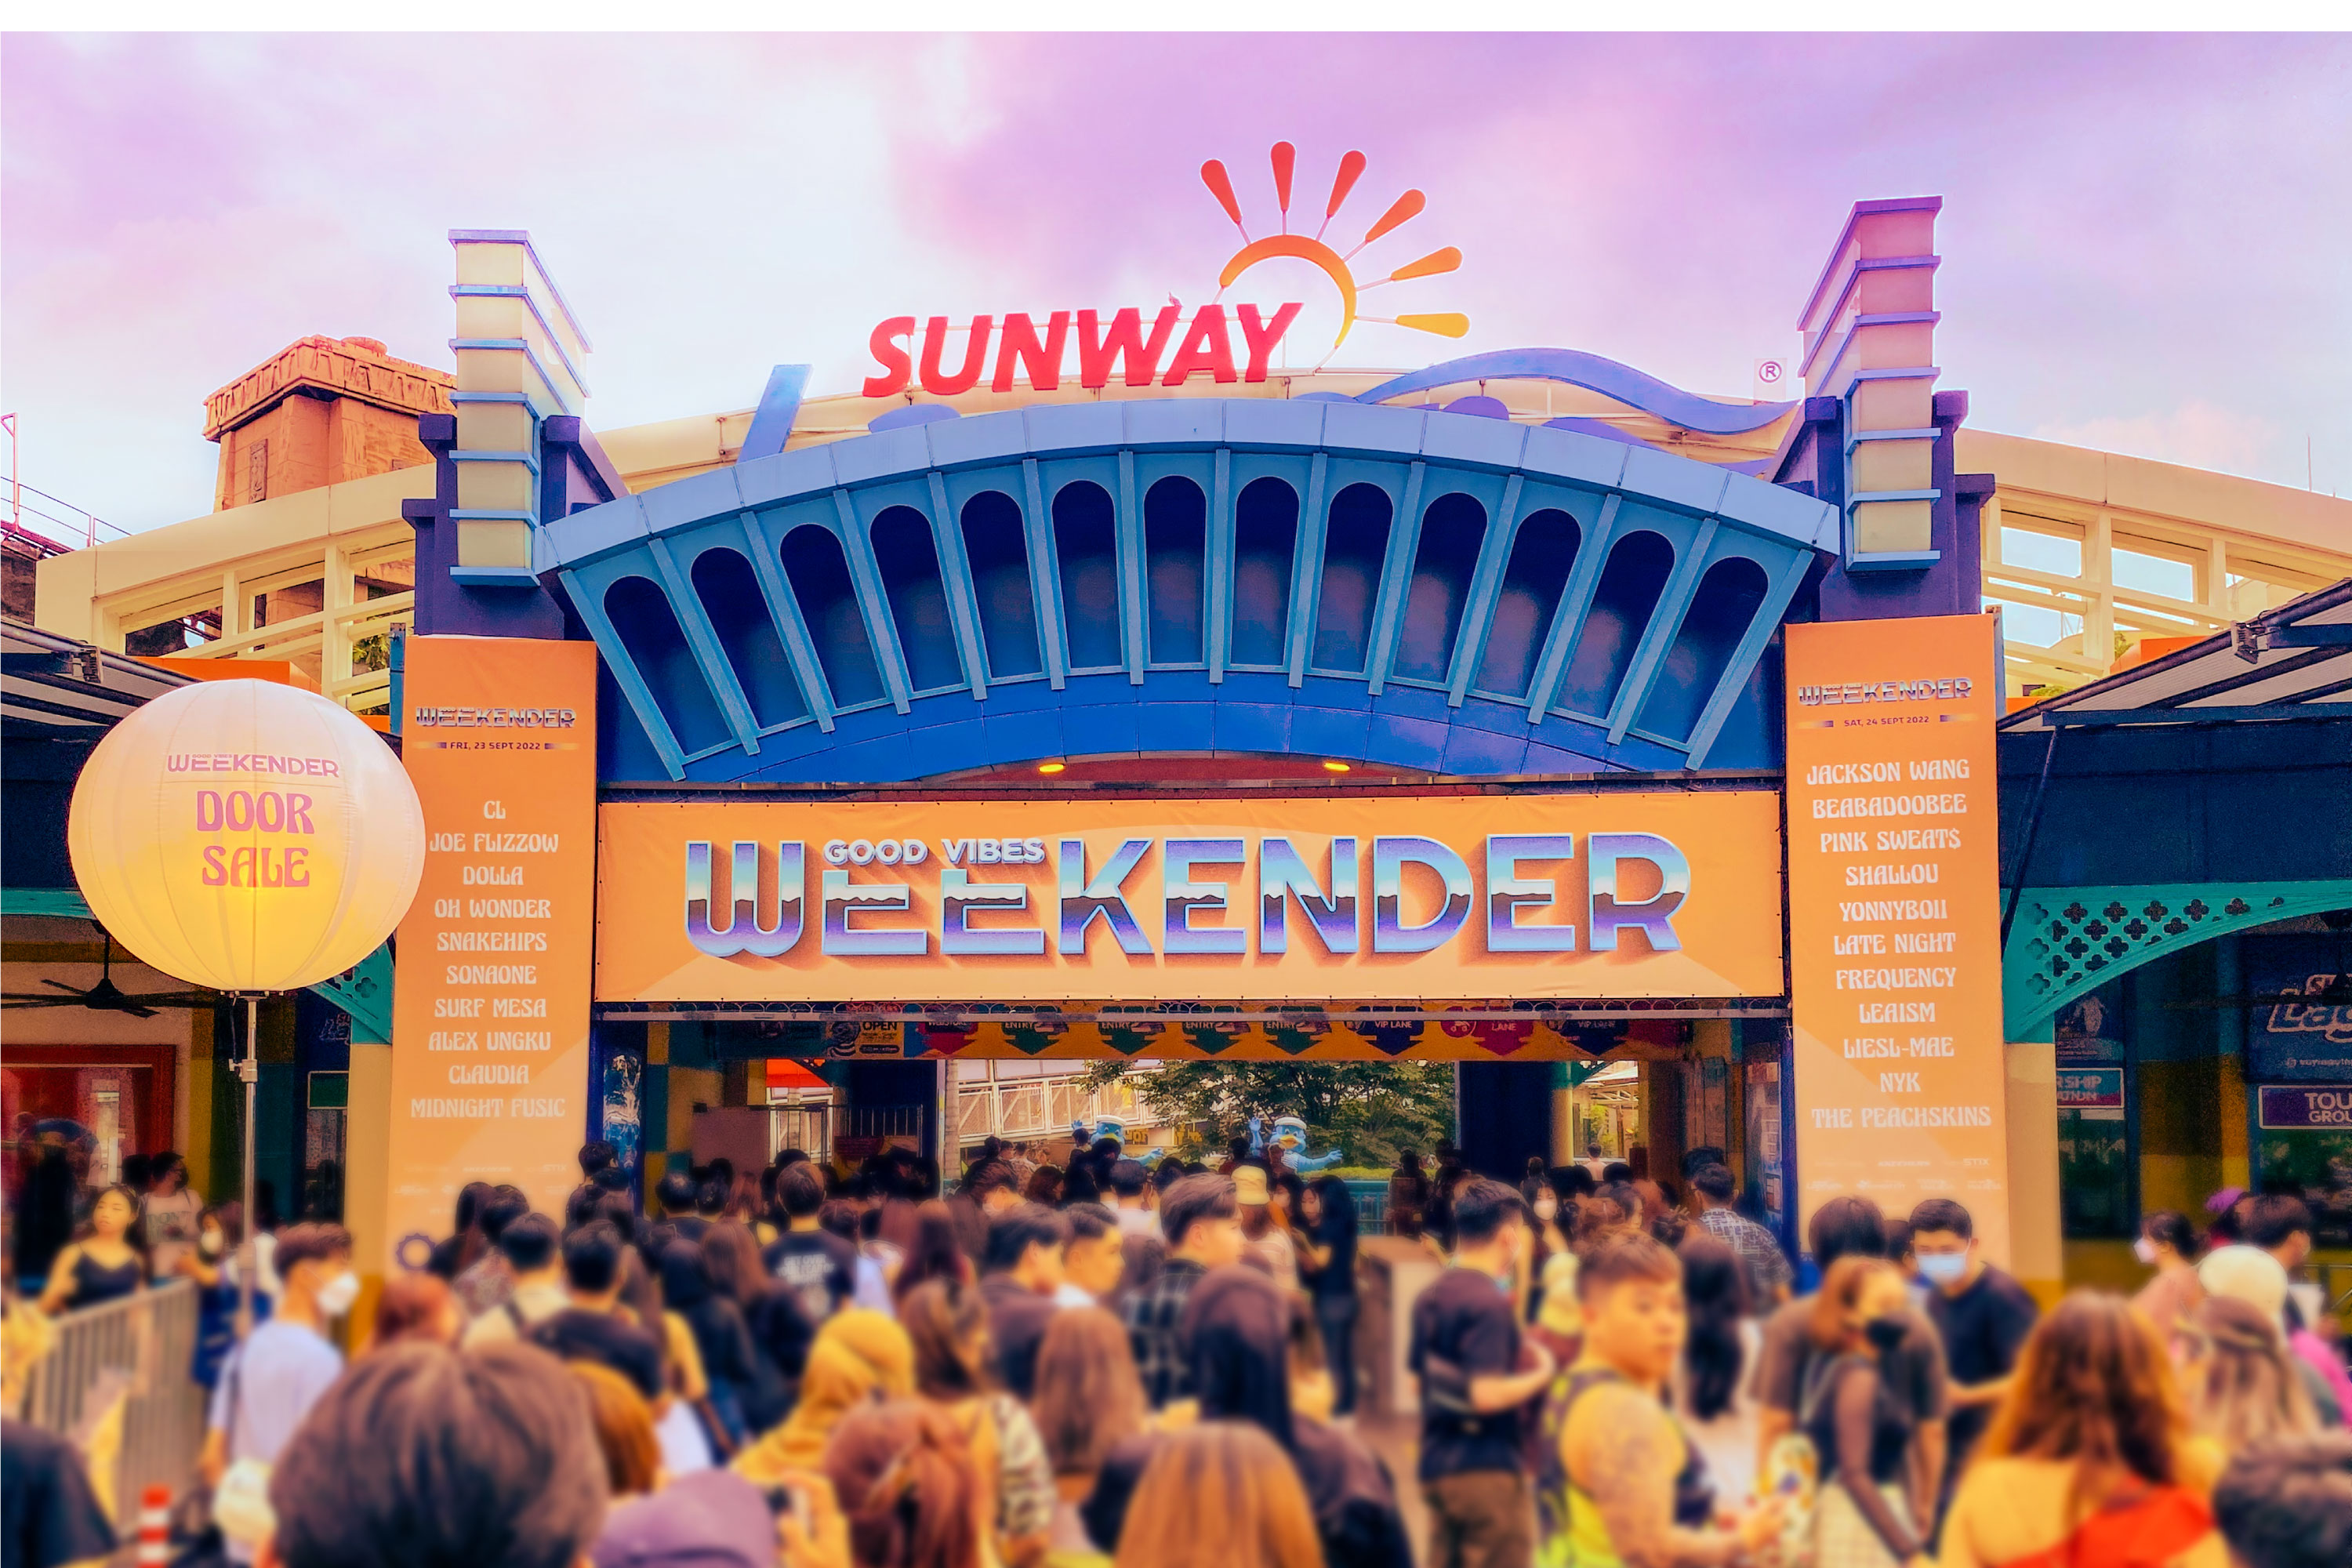 Drawing inspiration from the location – Surf Beach at Sunway Lagoon, the iconic Egyptian-inspired architecture silhouette lines the bottom of the poster in a shade of blue representing the water park and a sun with a glow of orange